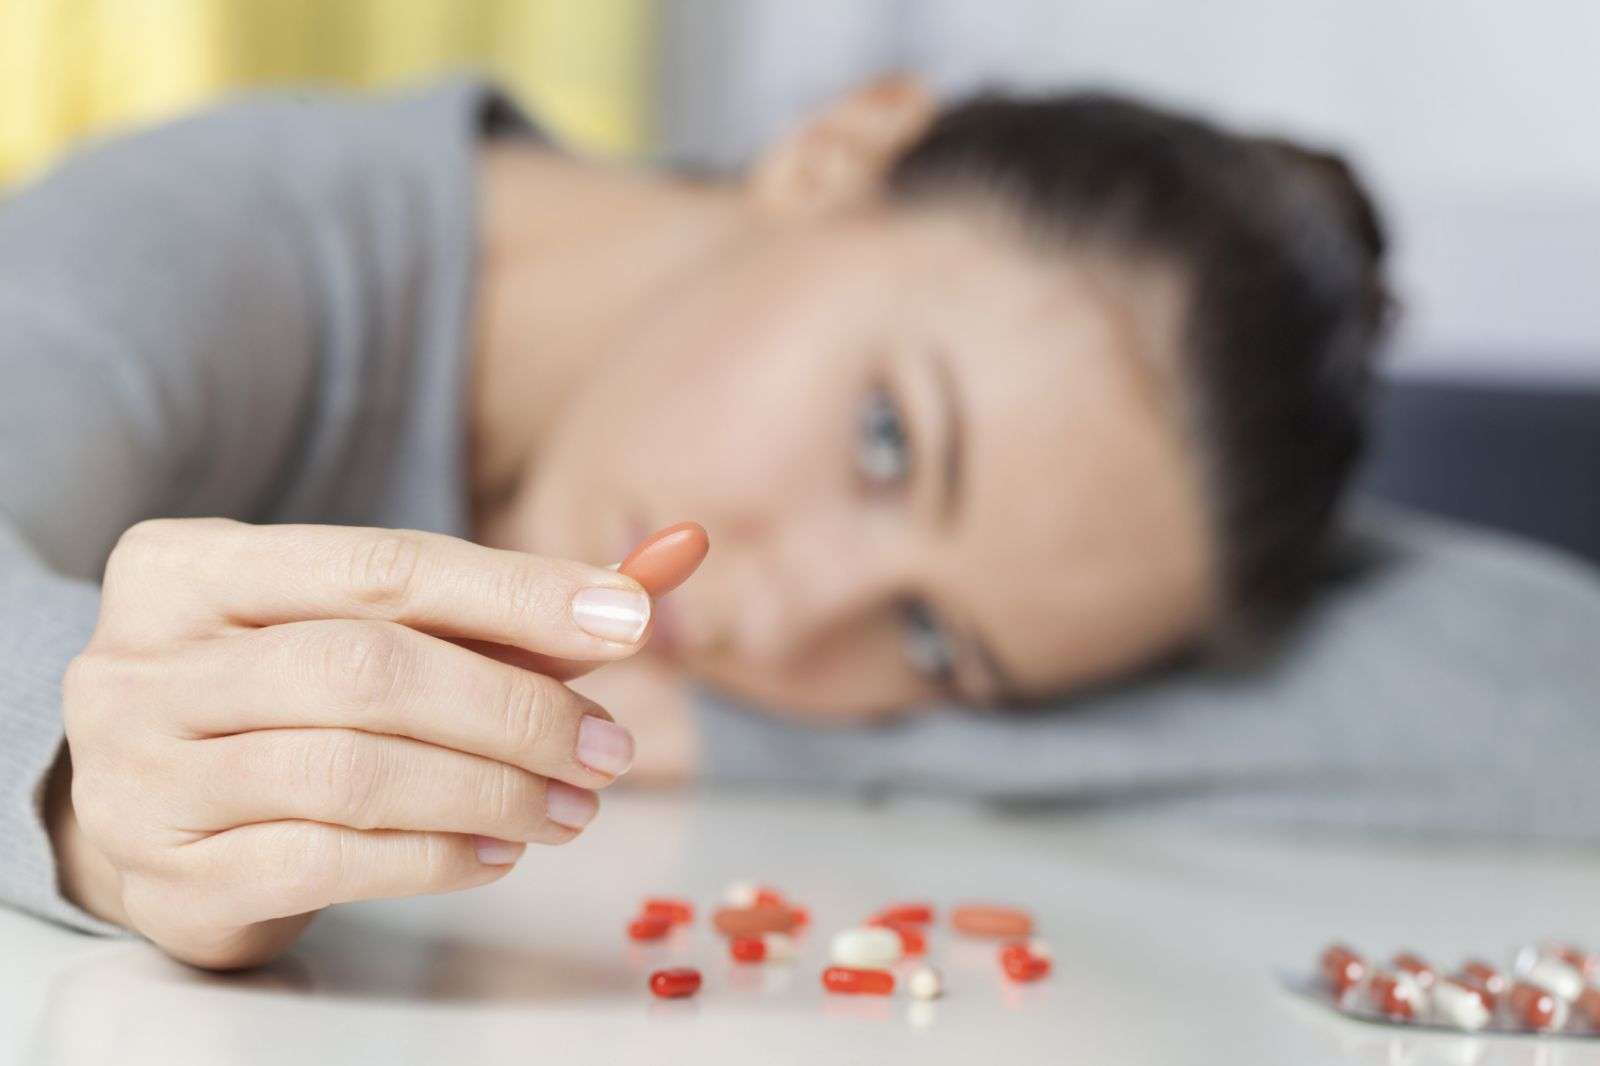 Medications for depression: Which is best?